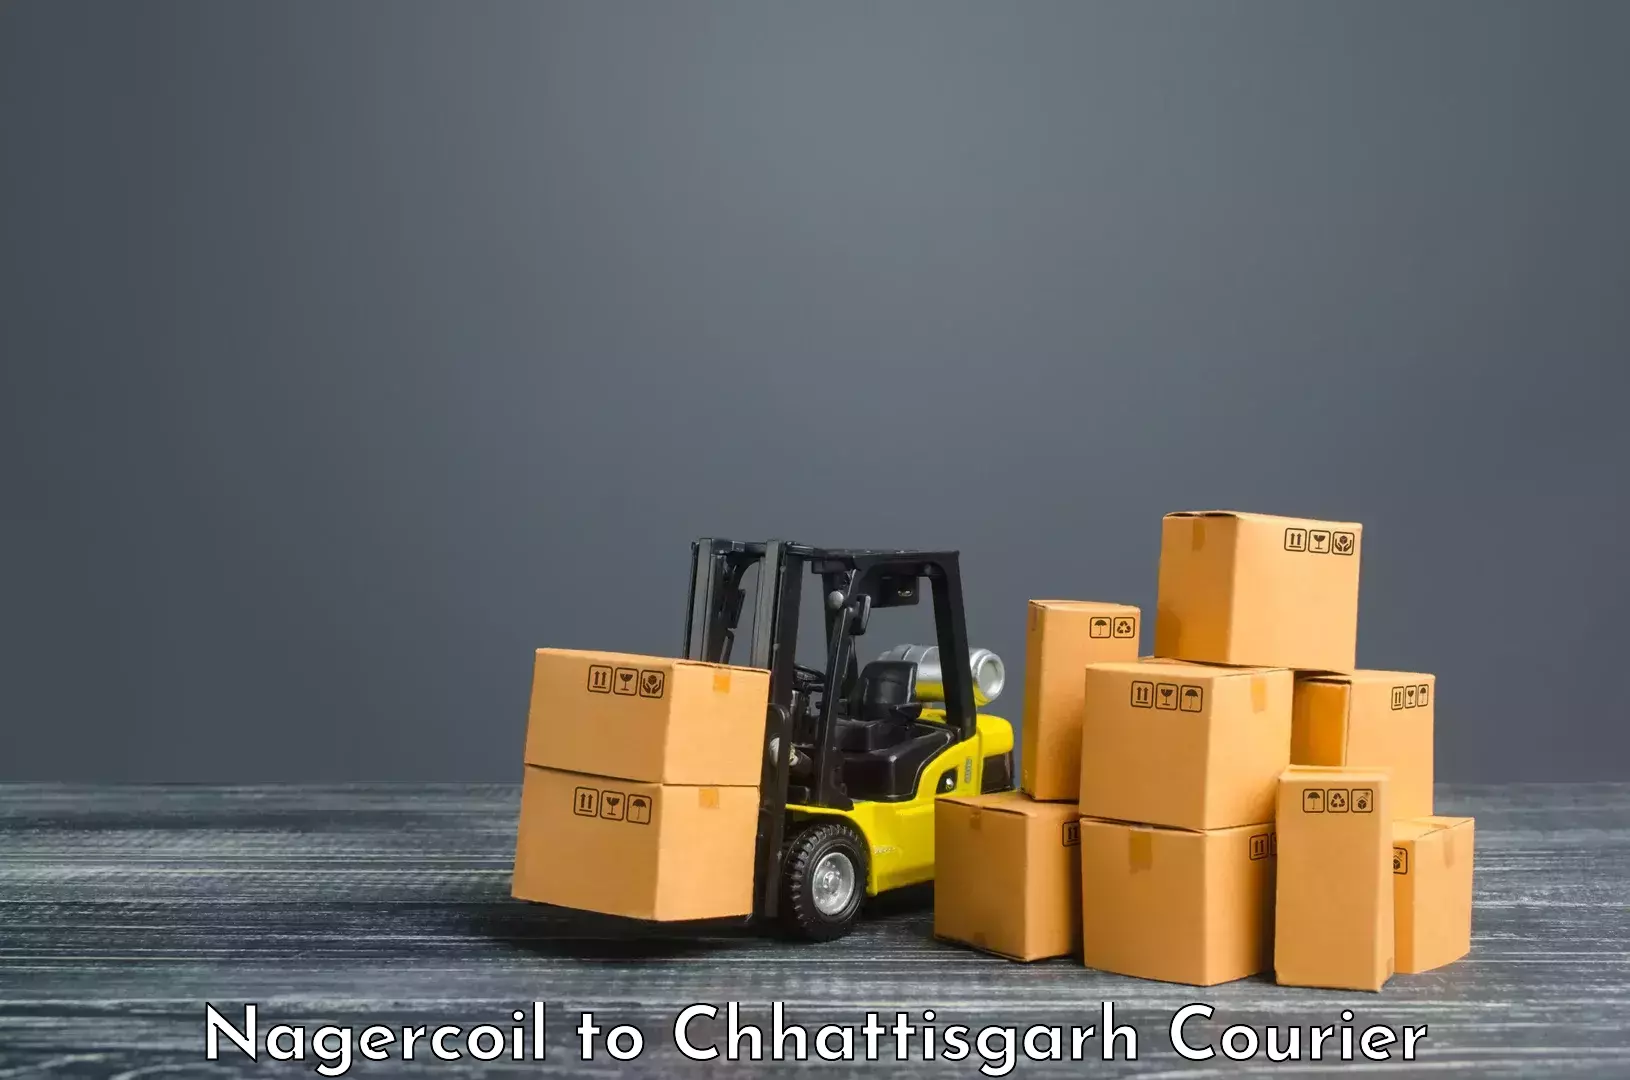 User-friendly courier app Nagercoil to Bargidih